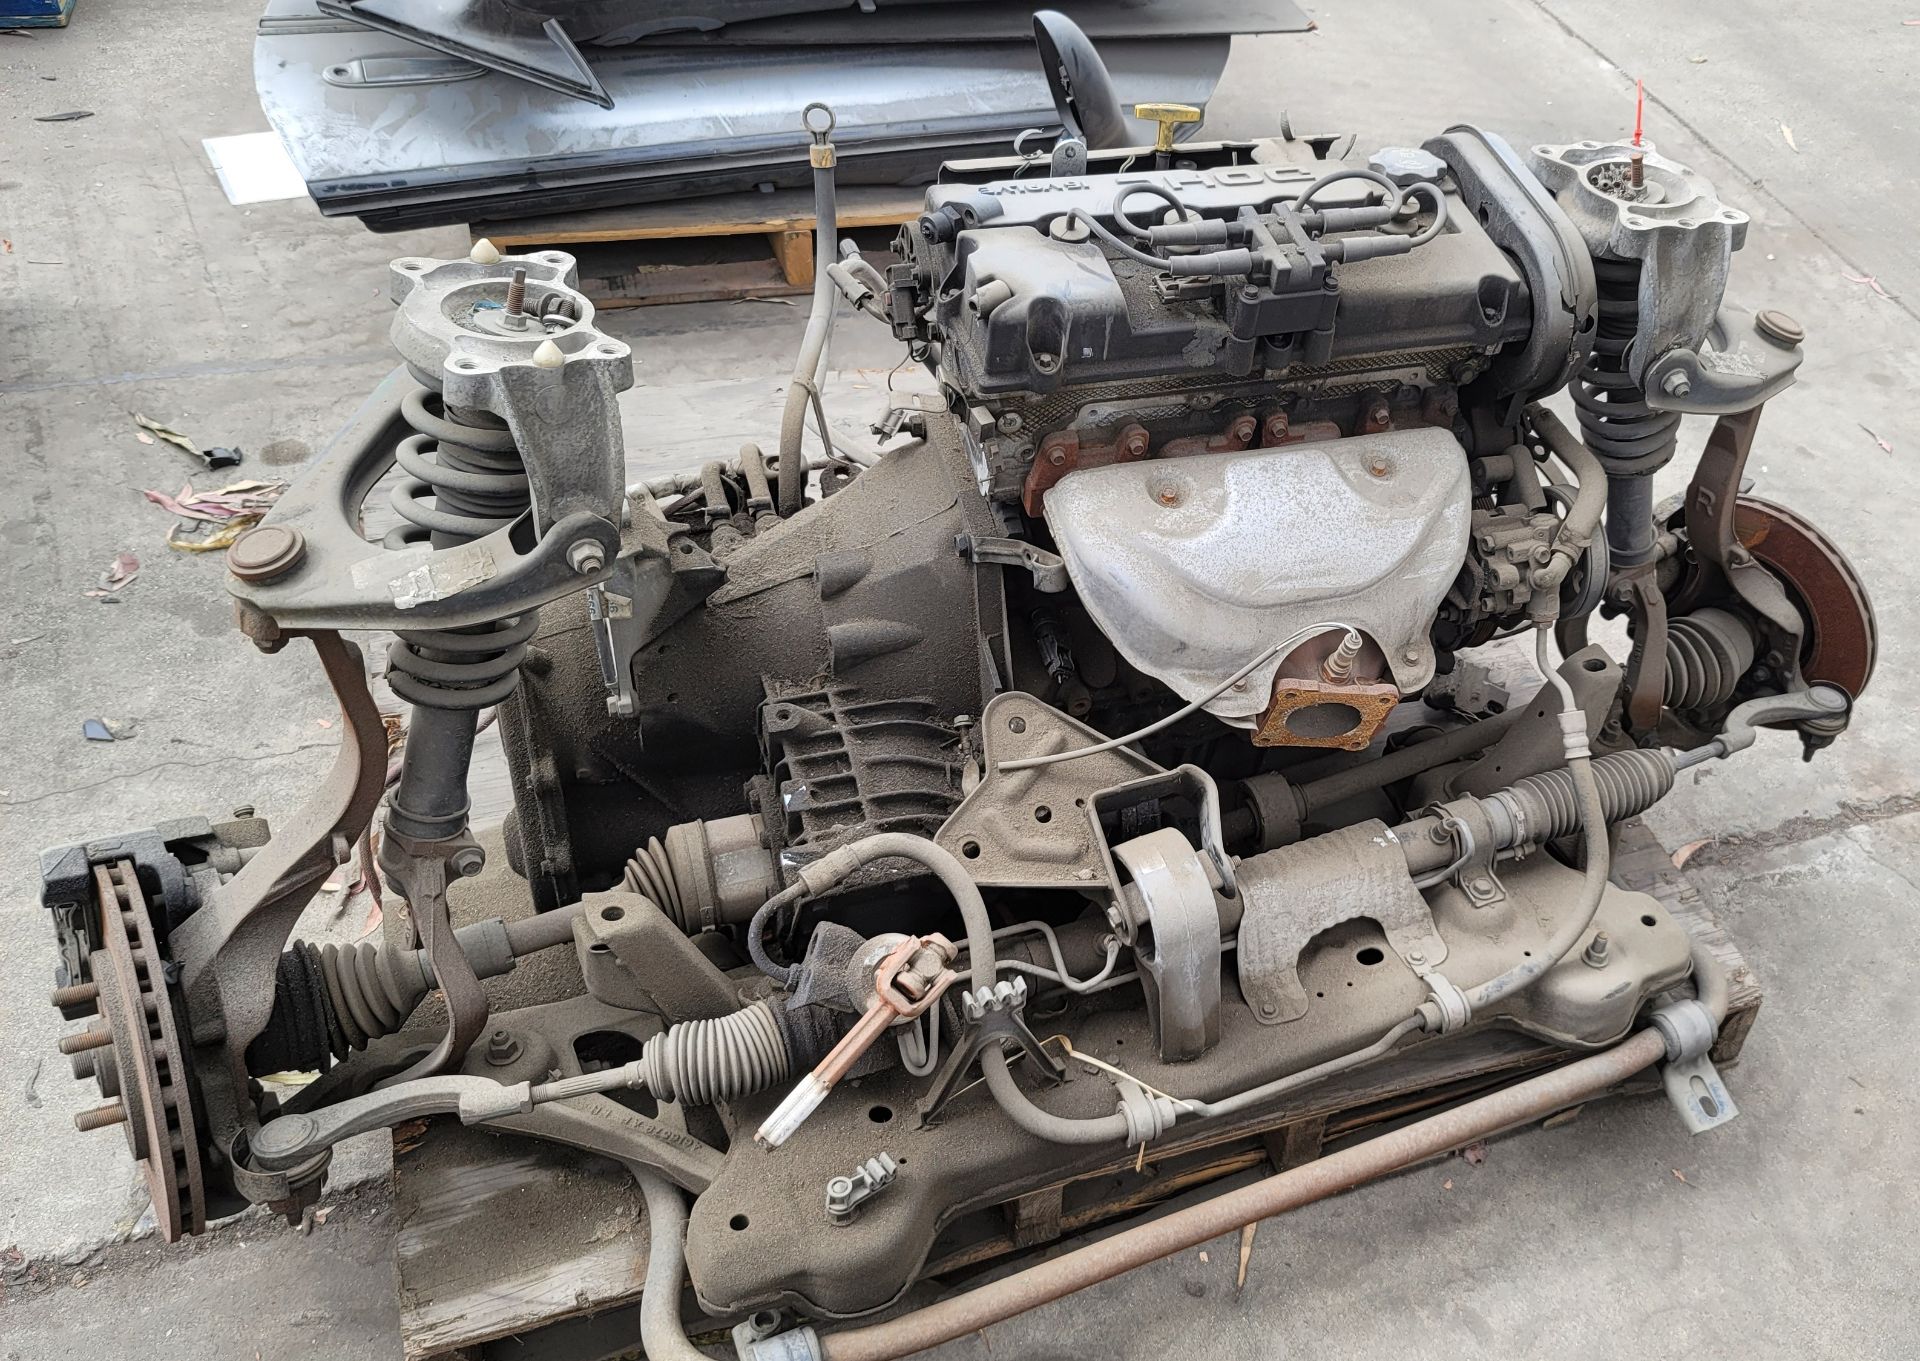 MITSUBISHI 2.4L ENGINE, TRANSMISSION AND DRIVE TRAIN FROM 2003 SEBRING CONVERTIBLE - Image 2 of 2